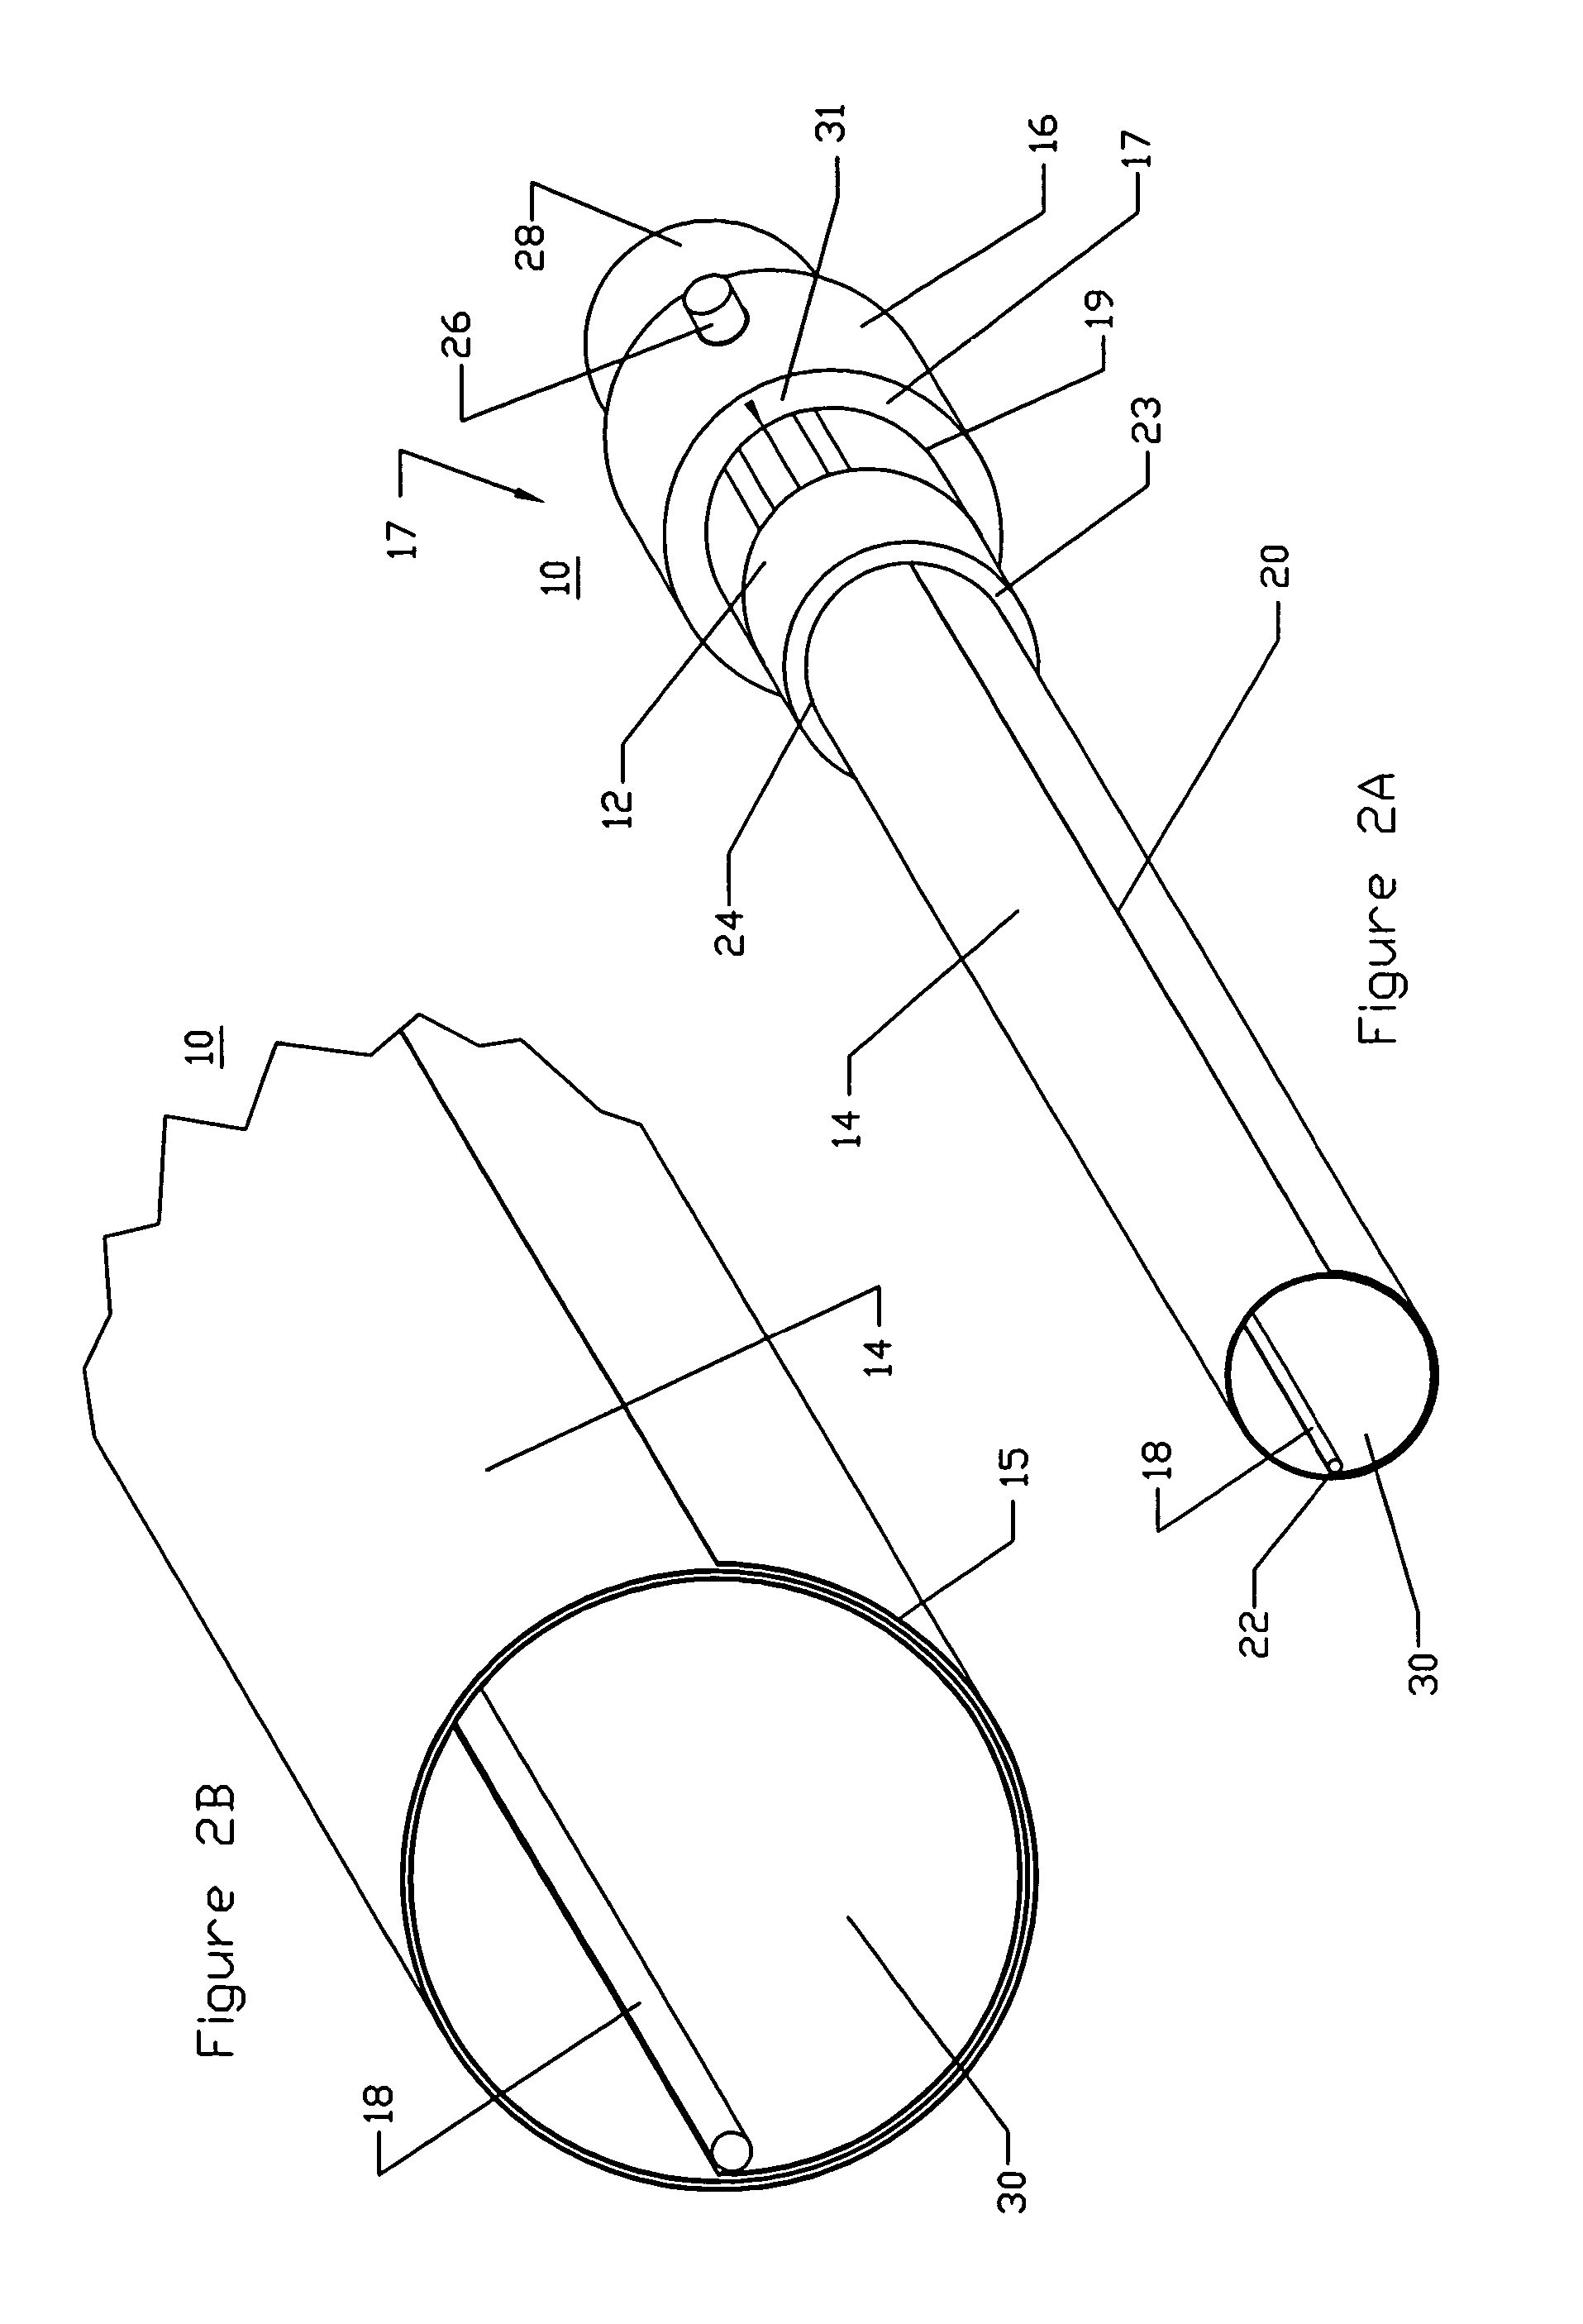 Expandable medical access device